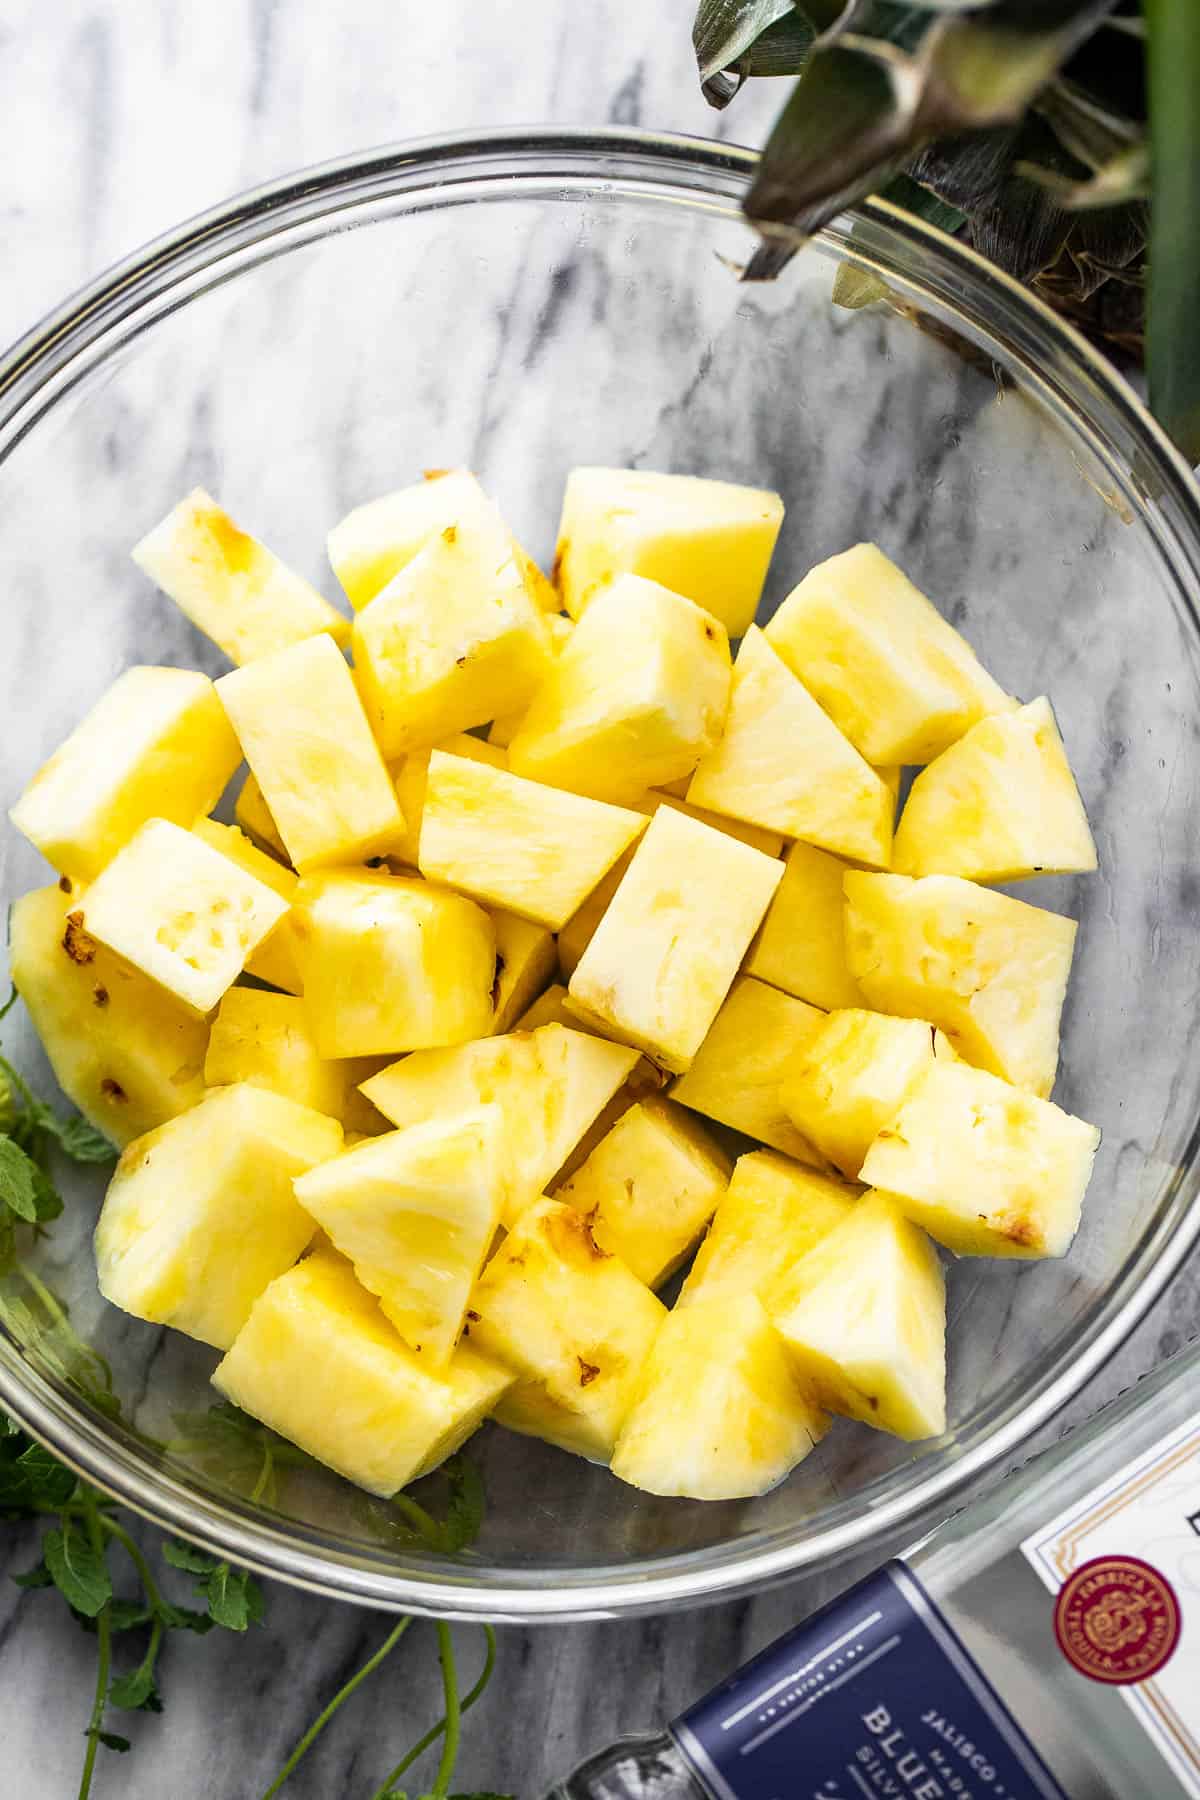 diced fresh pineapple in a glass bowl